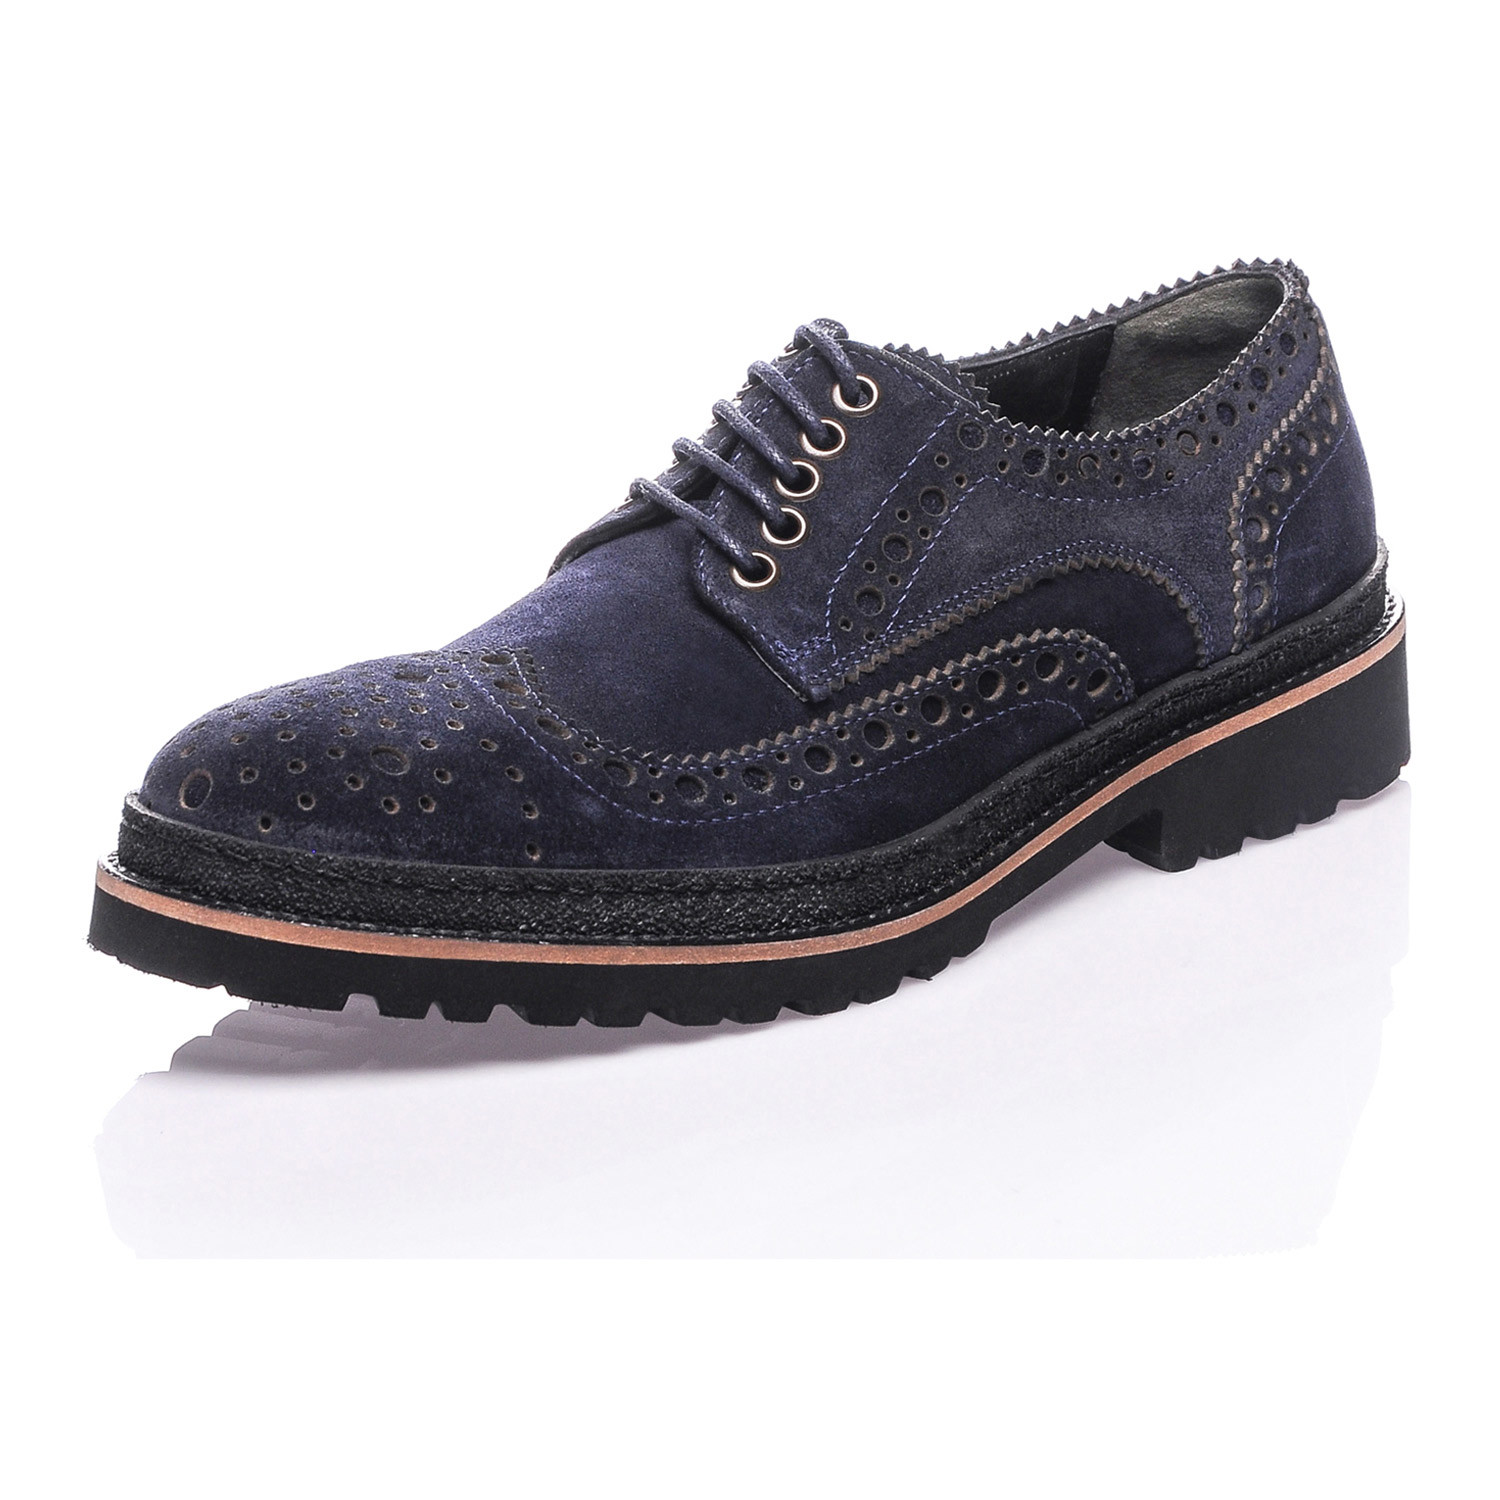 Tresel // Burnished Suede Derby // Navy Blue (Euro: 40) - Baqietto ...